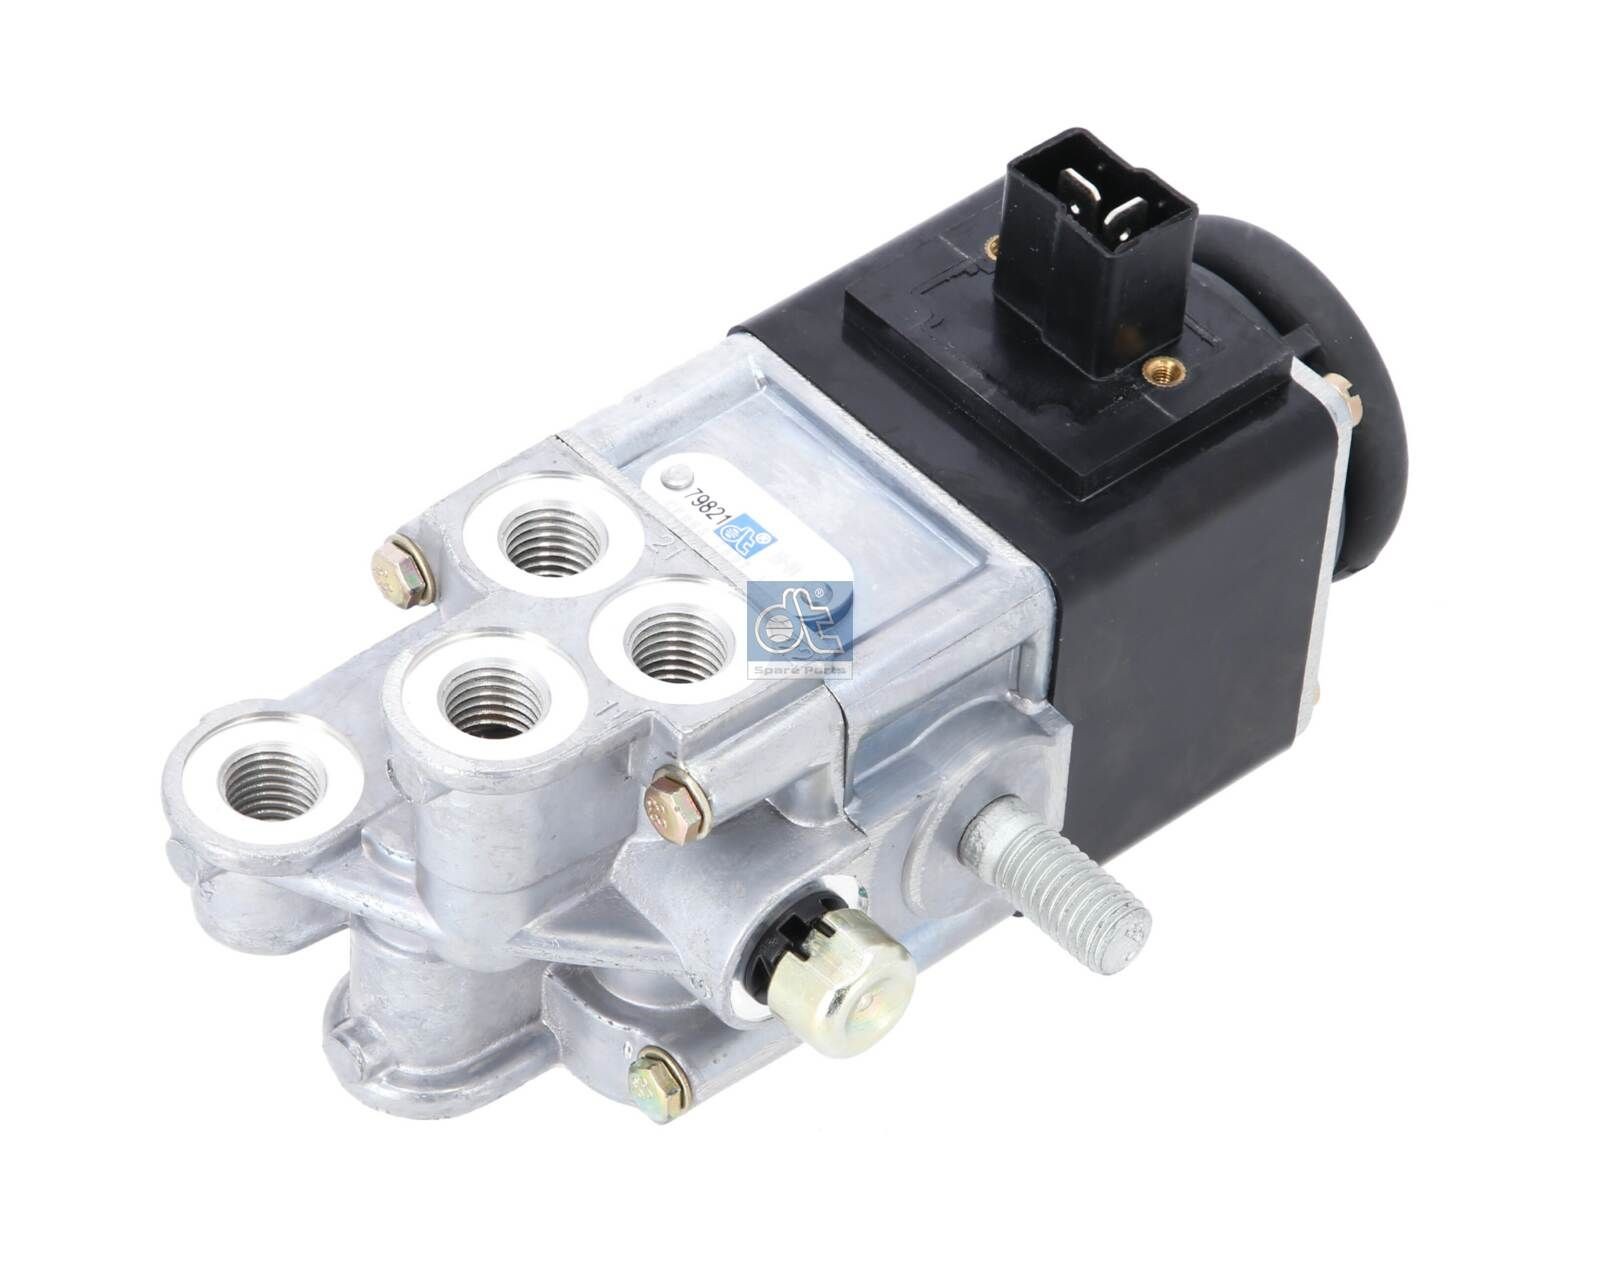 DT Spare Parts 7.70175 Solenoid Valve cheap in online store